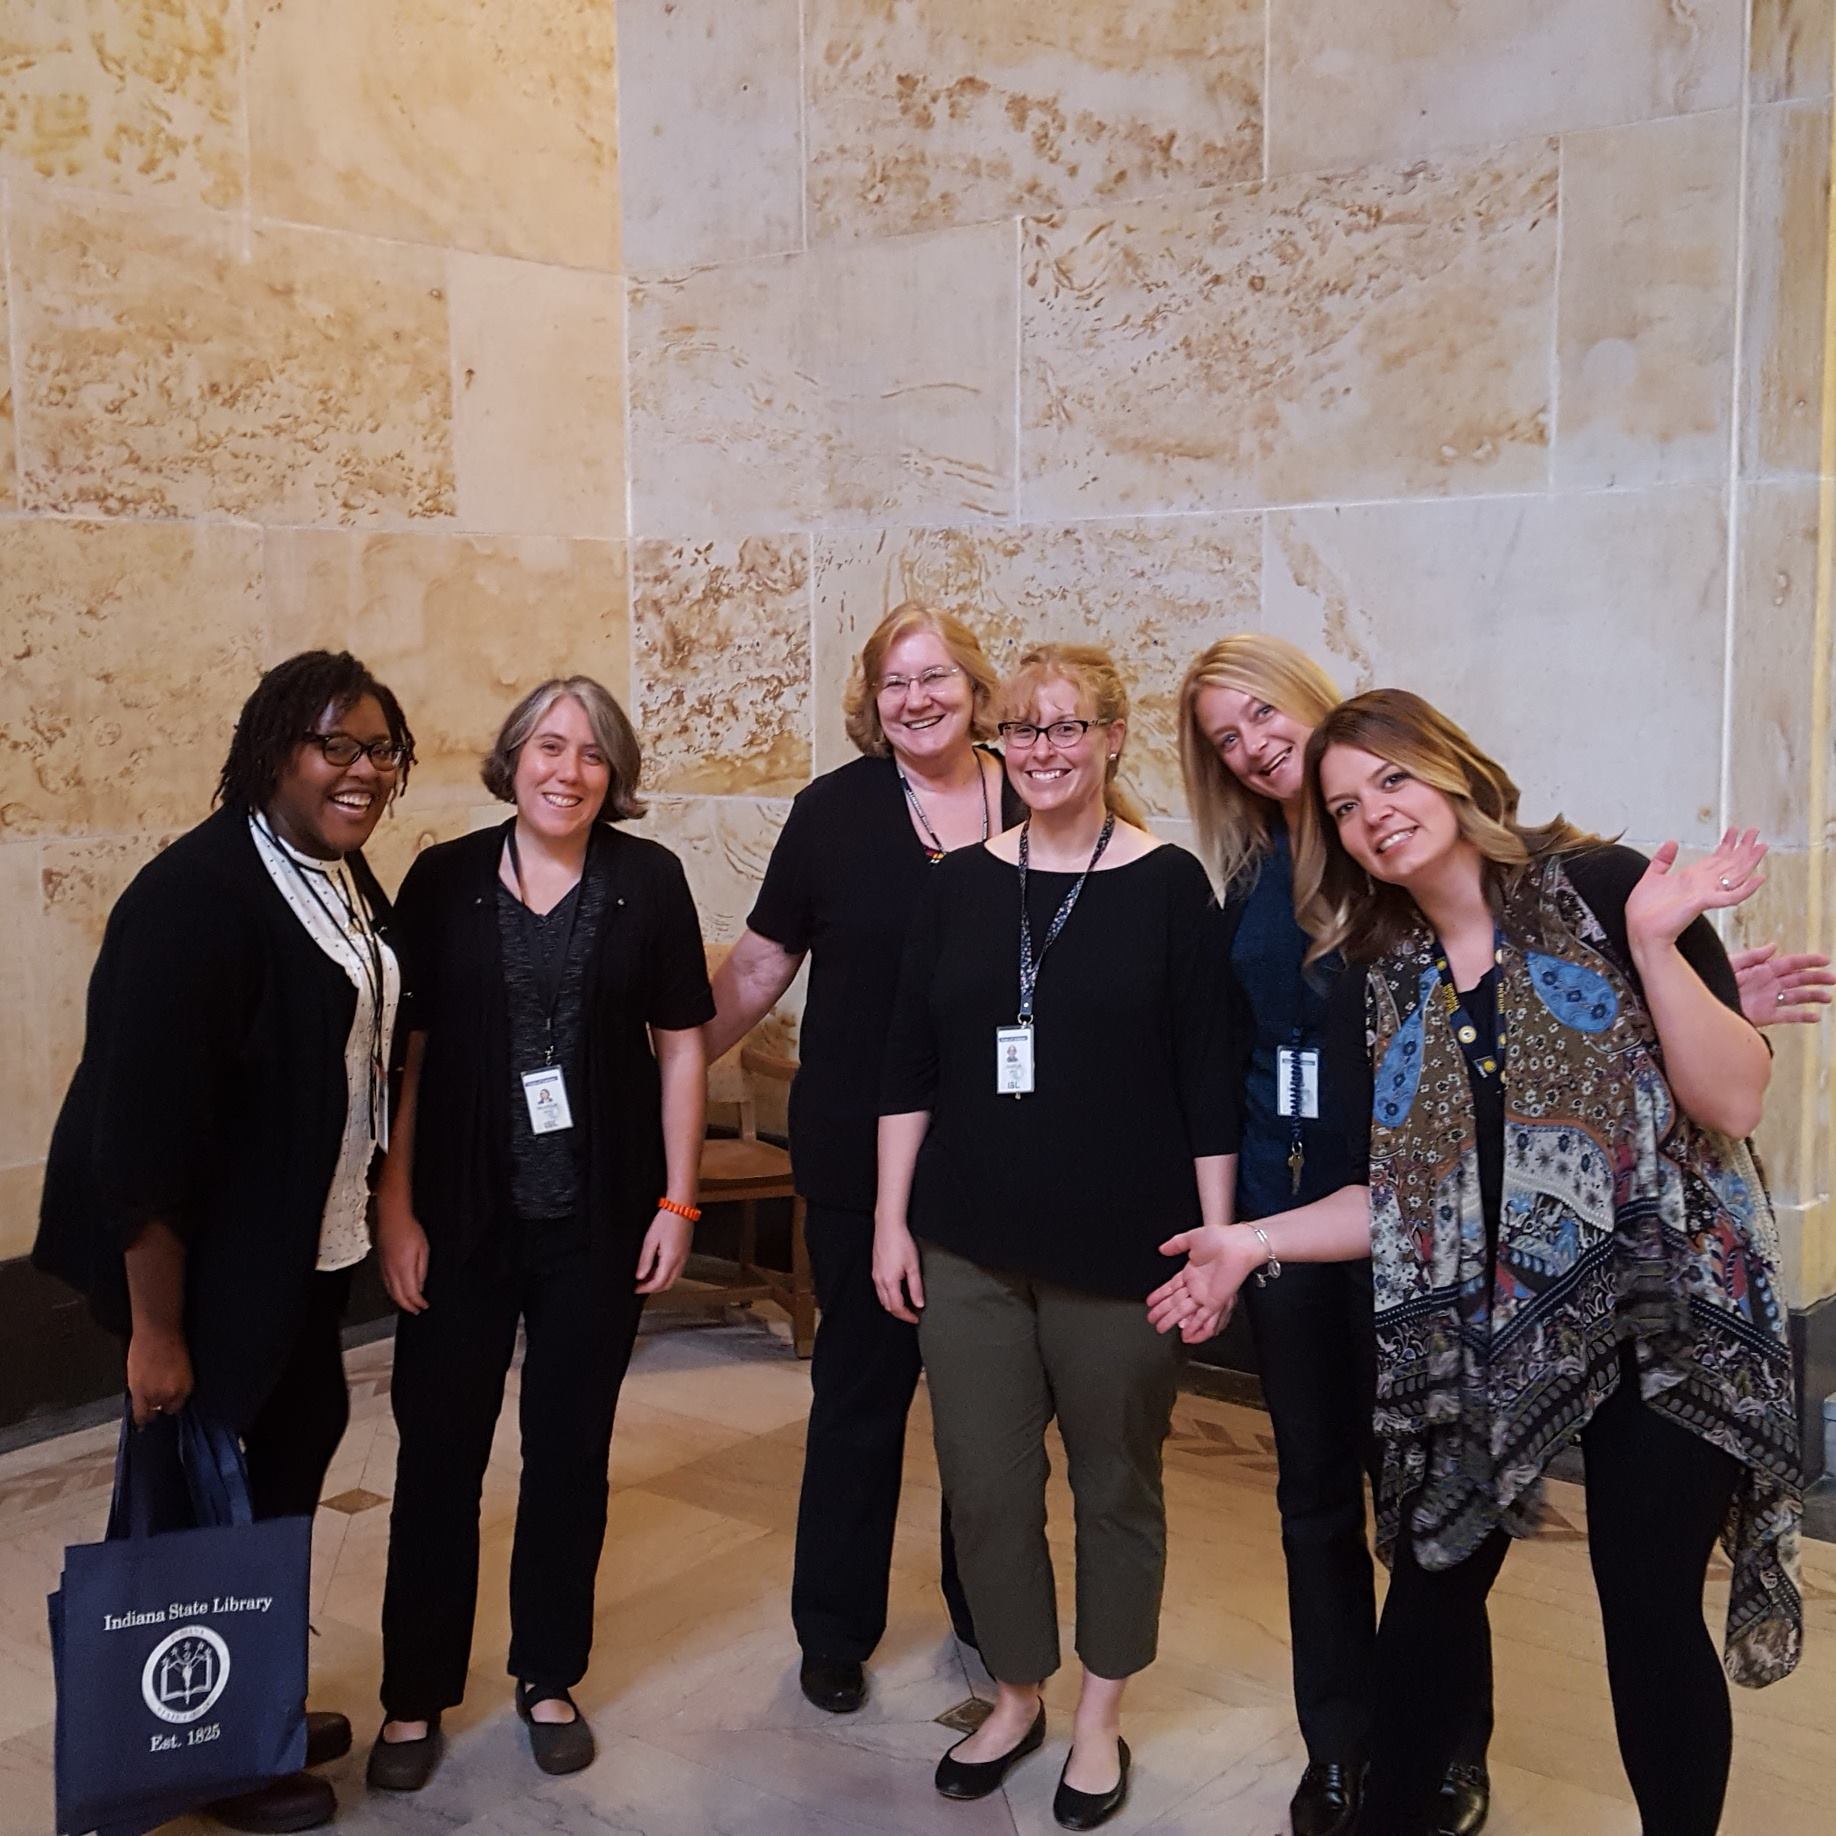 Pictured: Stephanie Smith (Circulation), Monique Howell (Indiana), Marcia Caudell (Reference), Jocelyn Lewis (Catalog), Stephanie Asberry (Genealogy), Bethany Fiechter (Rare Books & Manuscripts) 